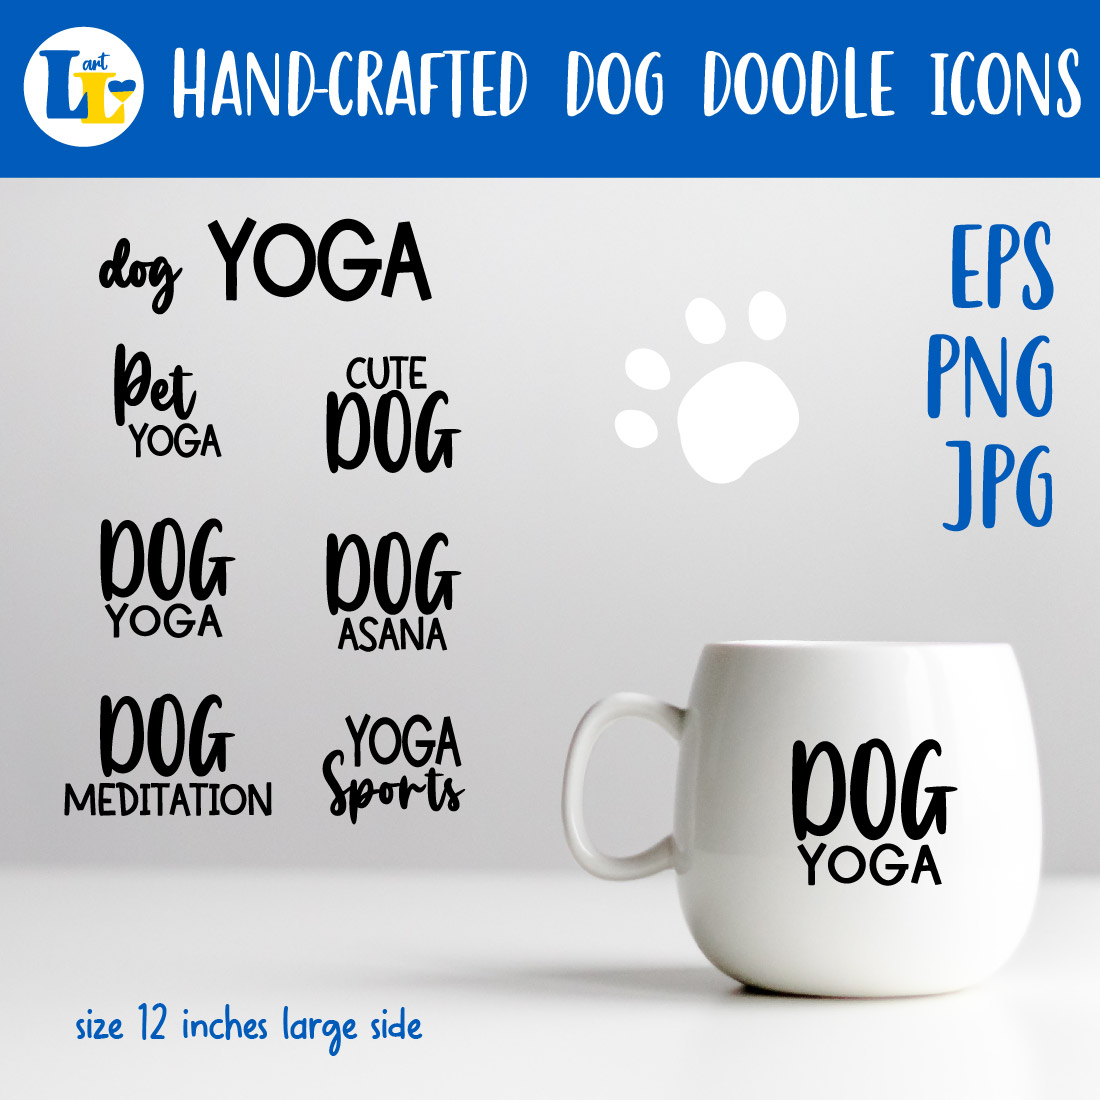 Yoga Dog Hand drawn Puppies Doodle Icons.